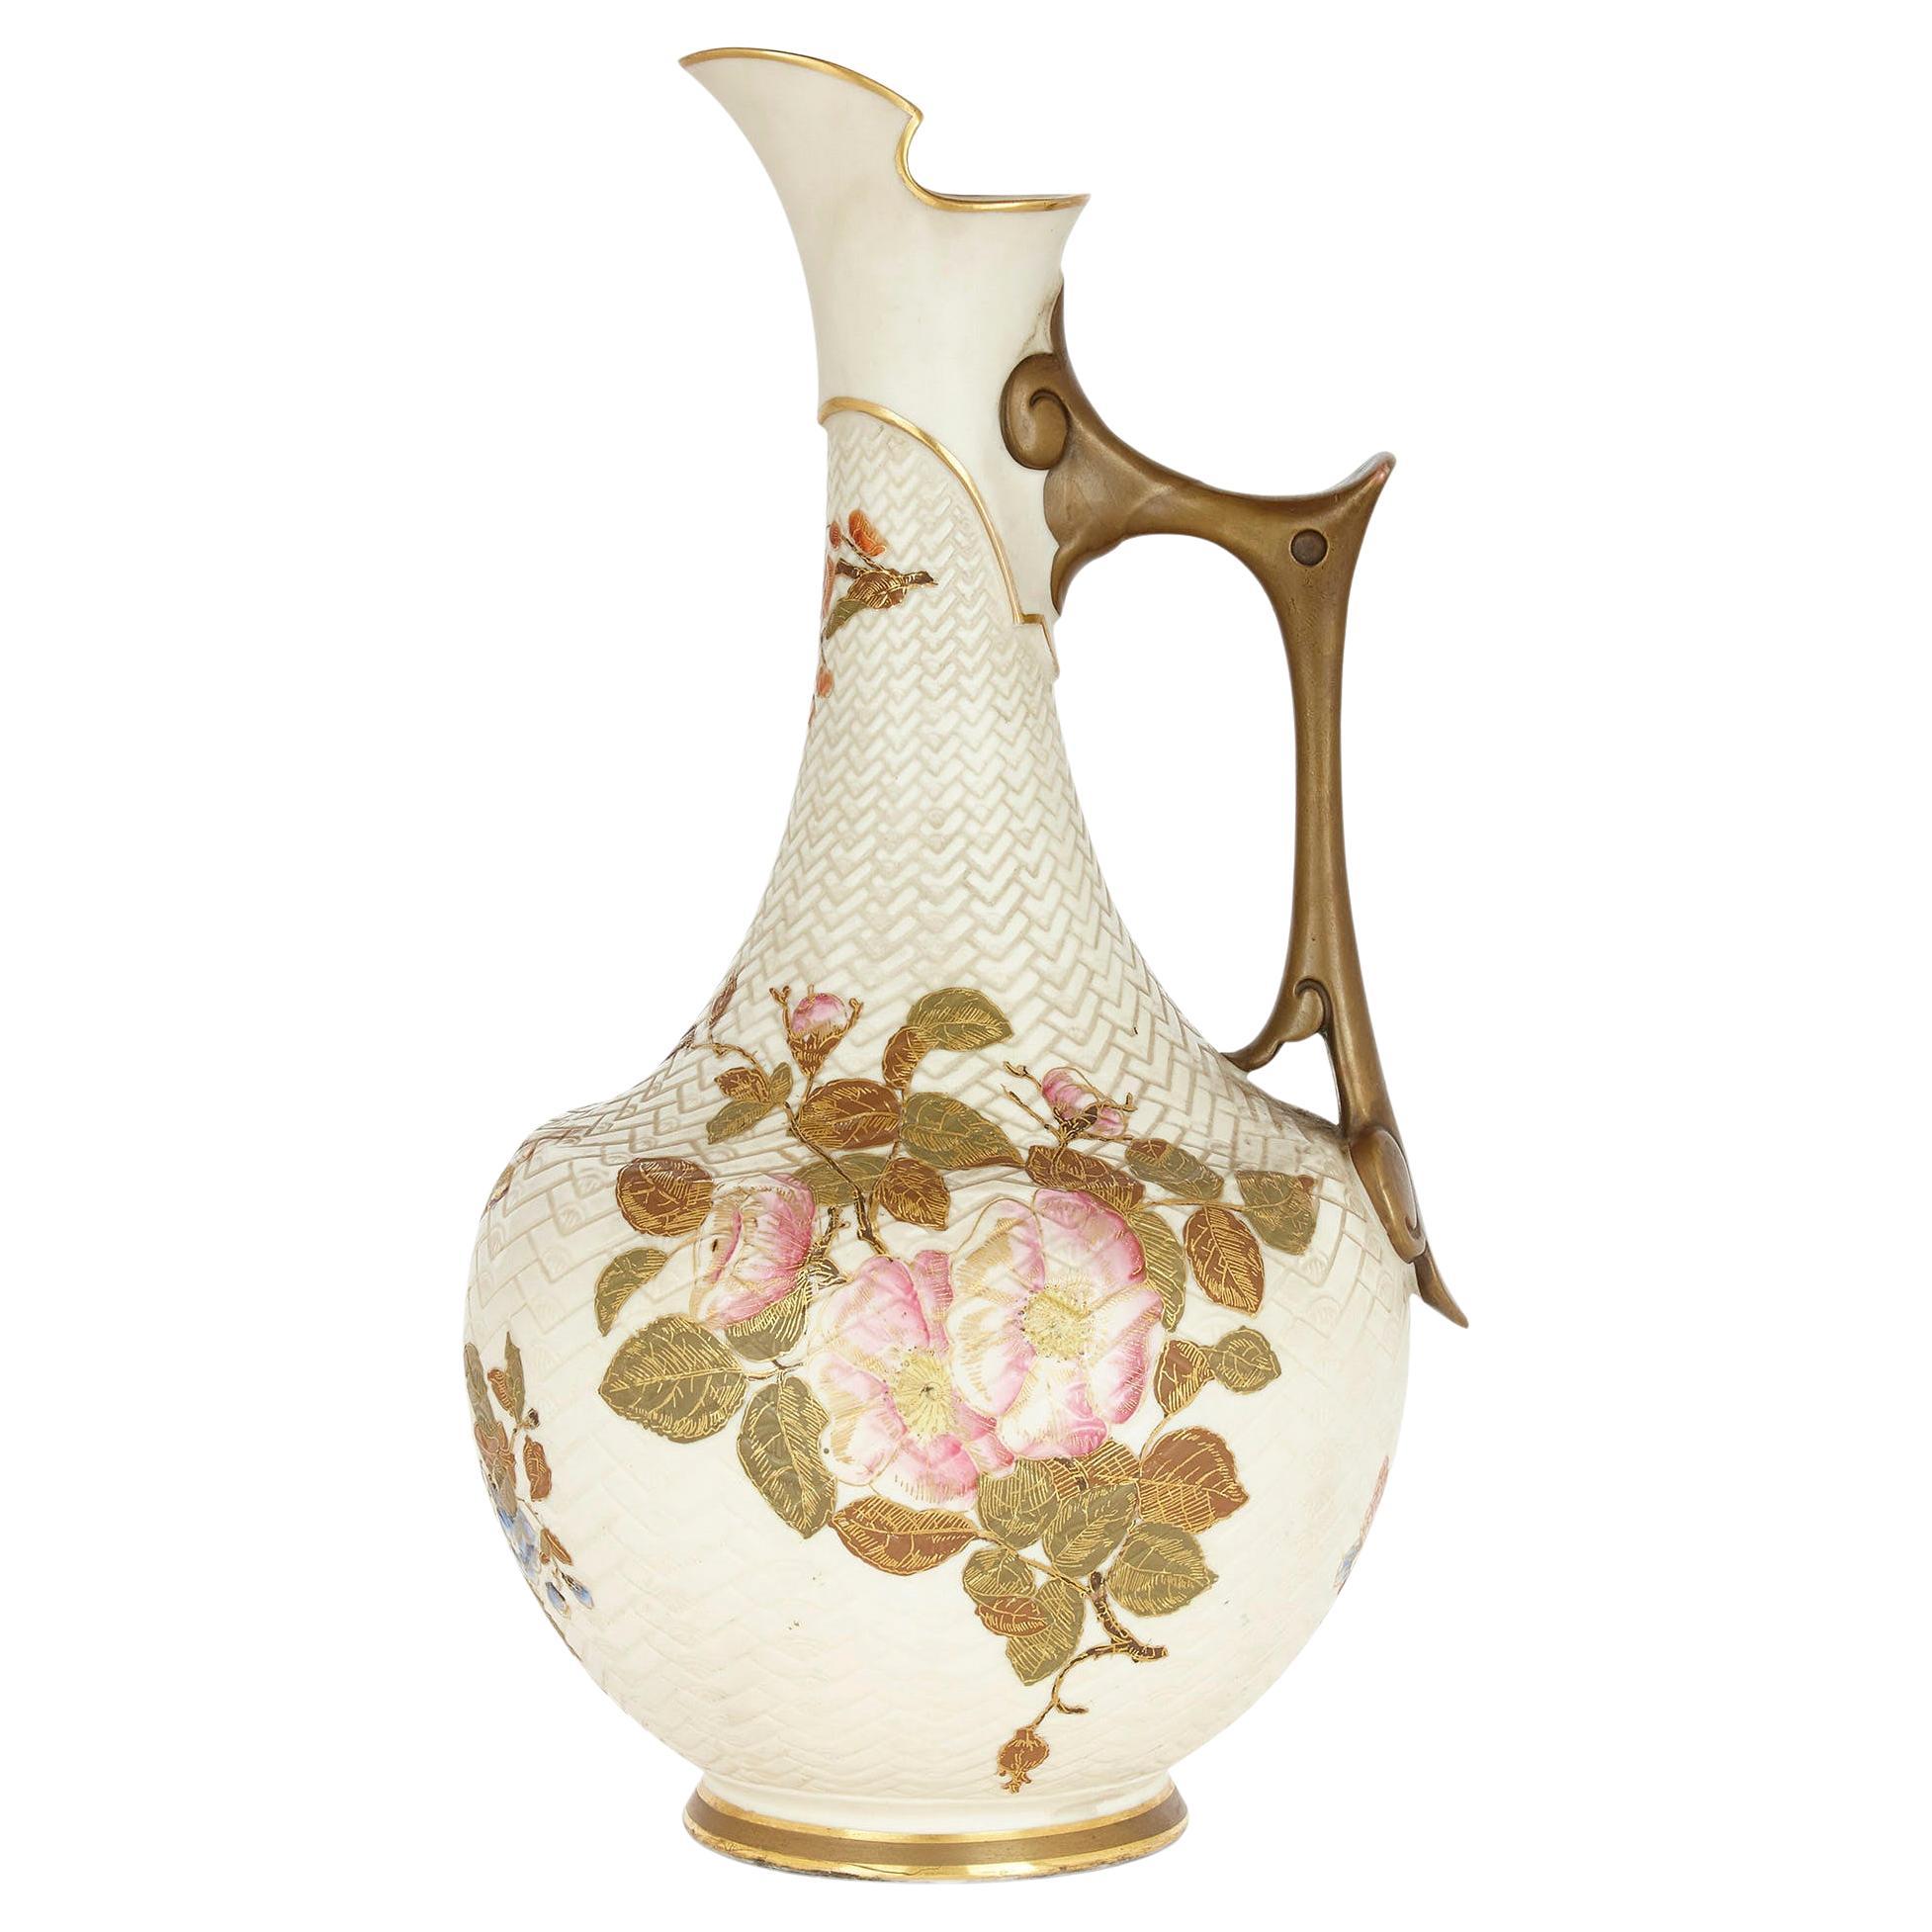 Japanese Style English Porcelain Ewer by Royal Worcester